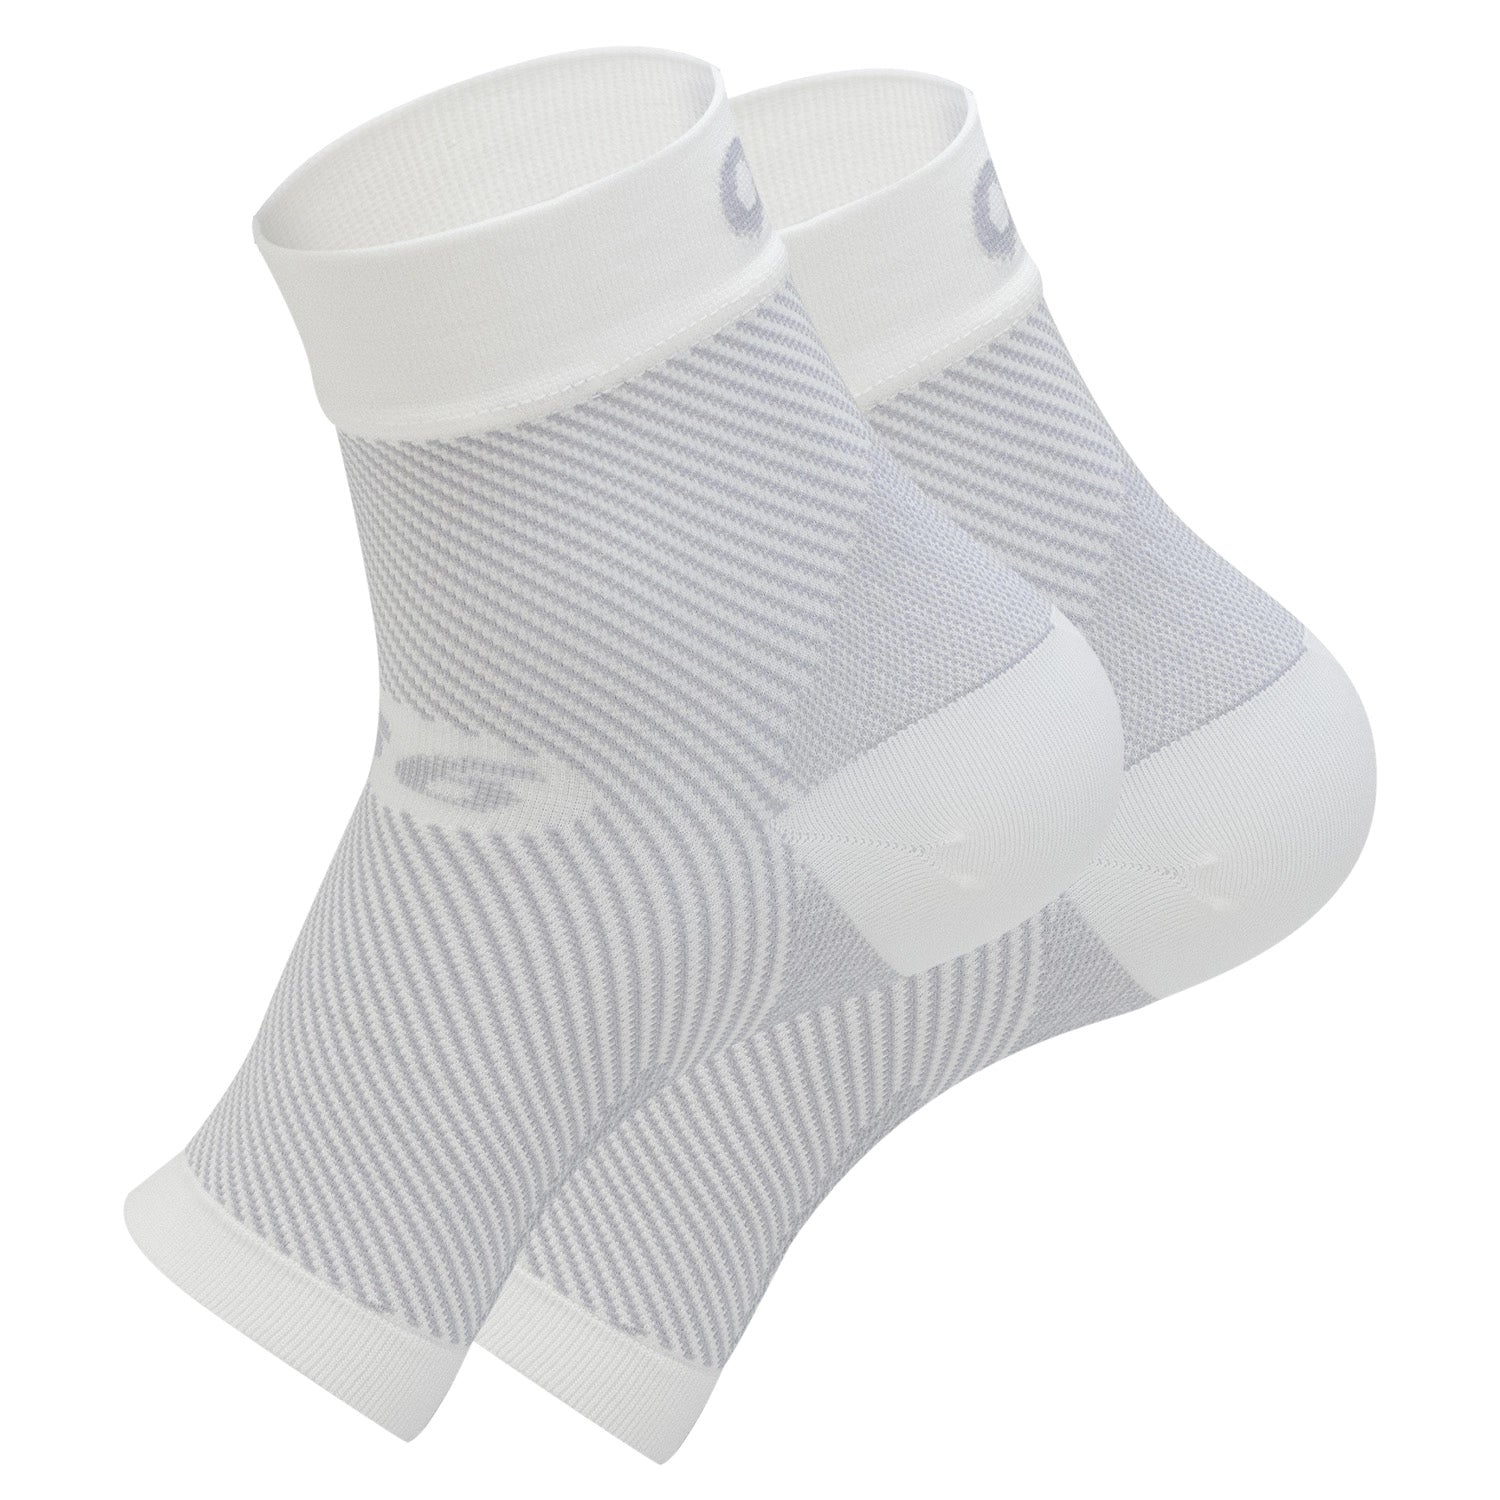 FS6 Performance Foot Sleeve pair in white | OS1st